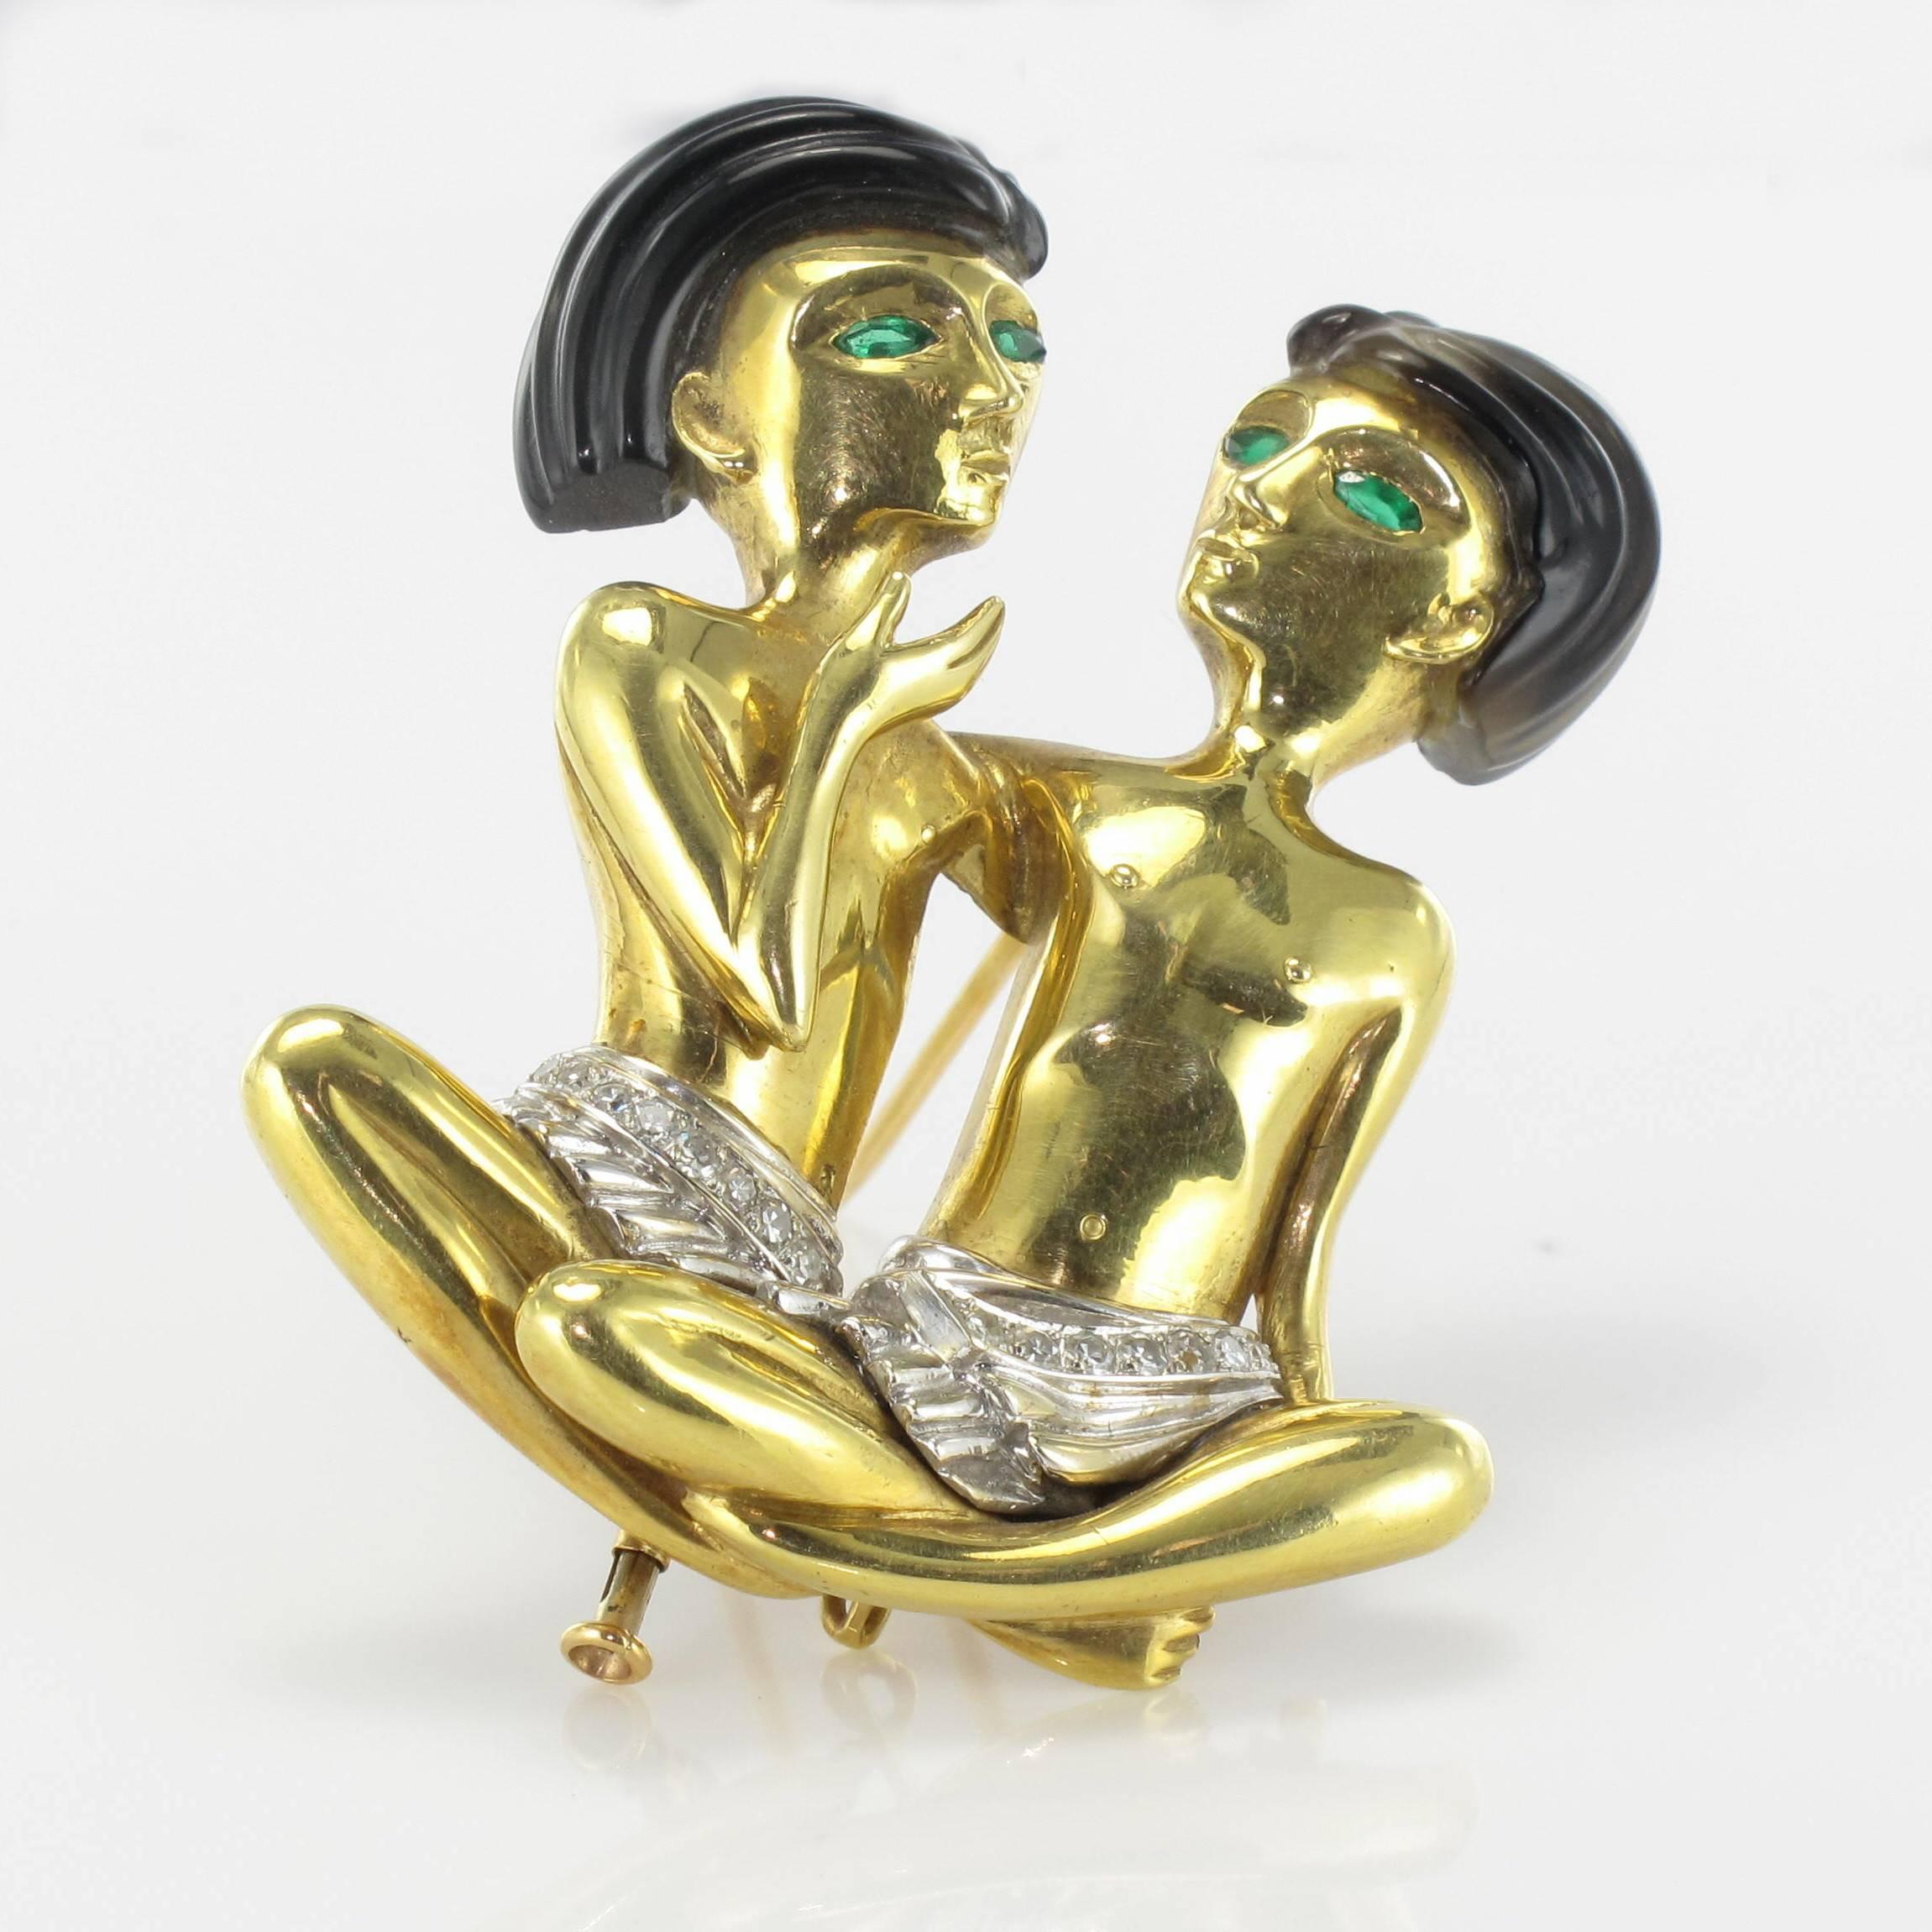 Brooch - Pendant in 18 carat yellow and white gold. 

Featuring 2 small seated Egyptian style figures with emerald eyes. Their hair is agate and their white loincloths are set with rows of diamonds. The clasp has 2 pins with a tube lock. This